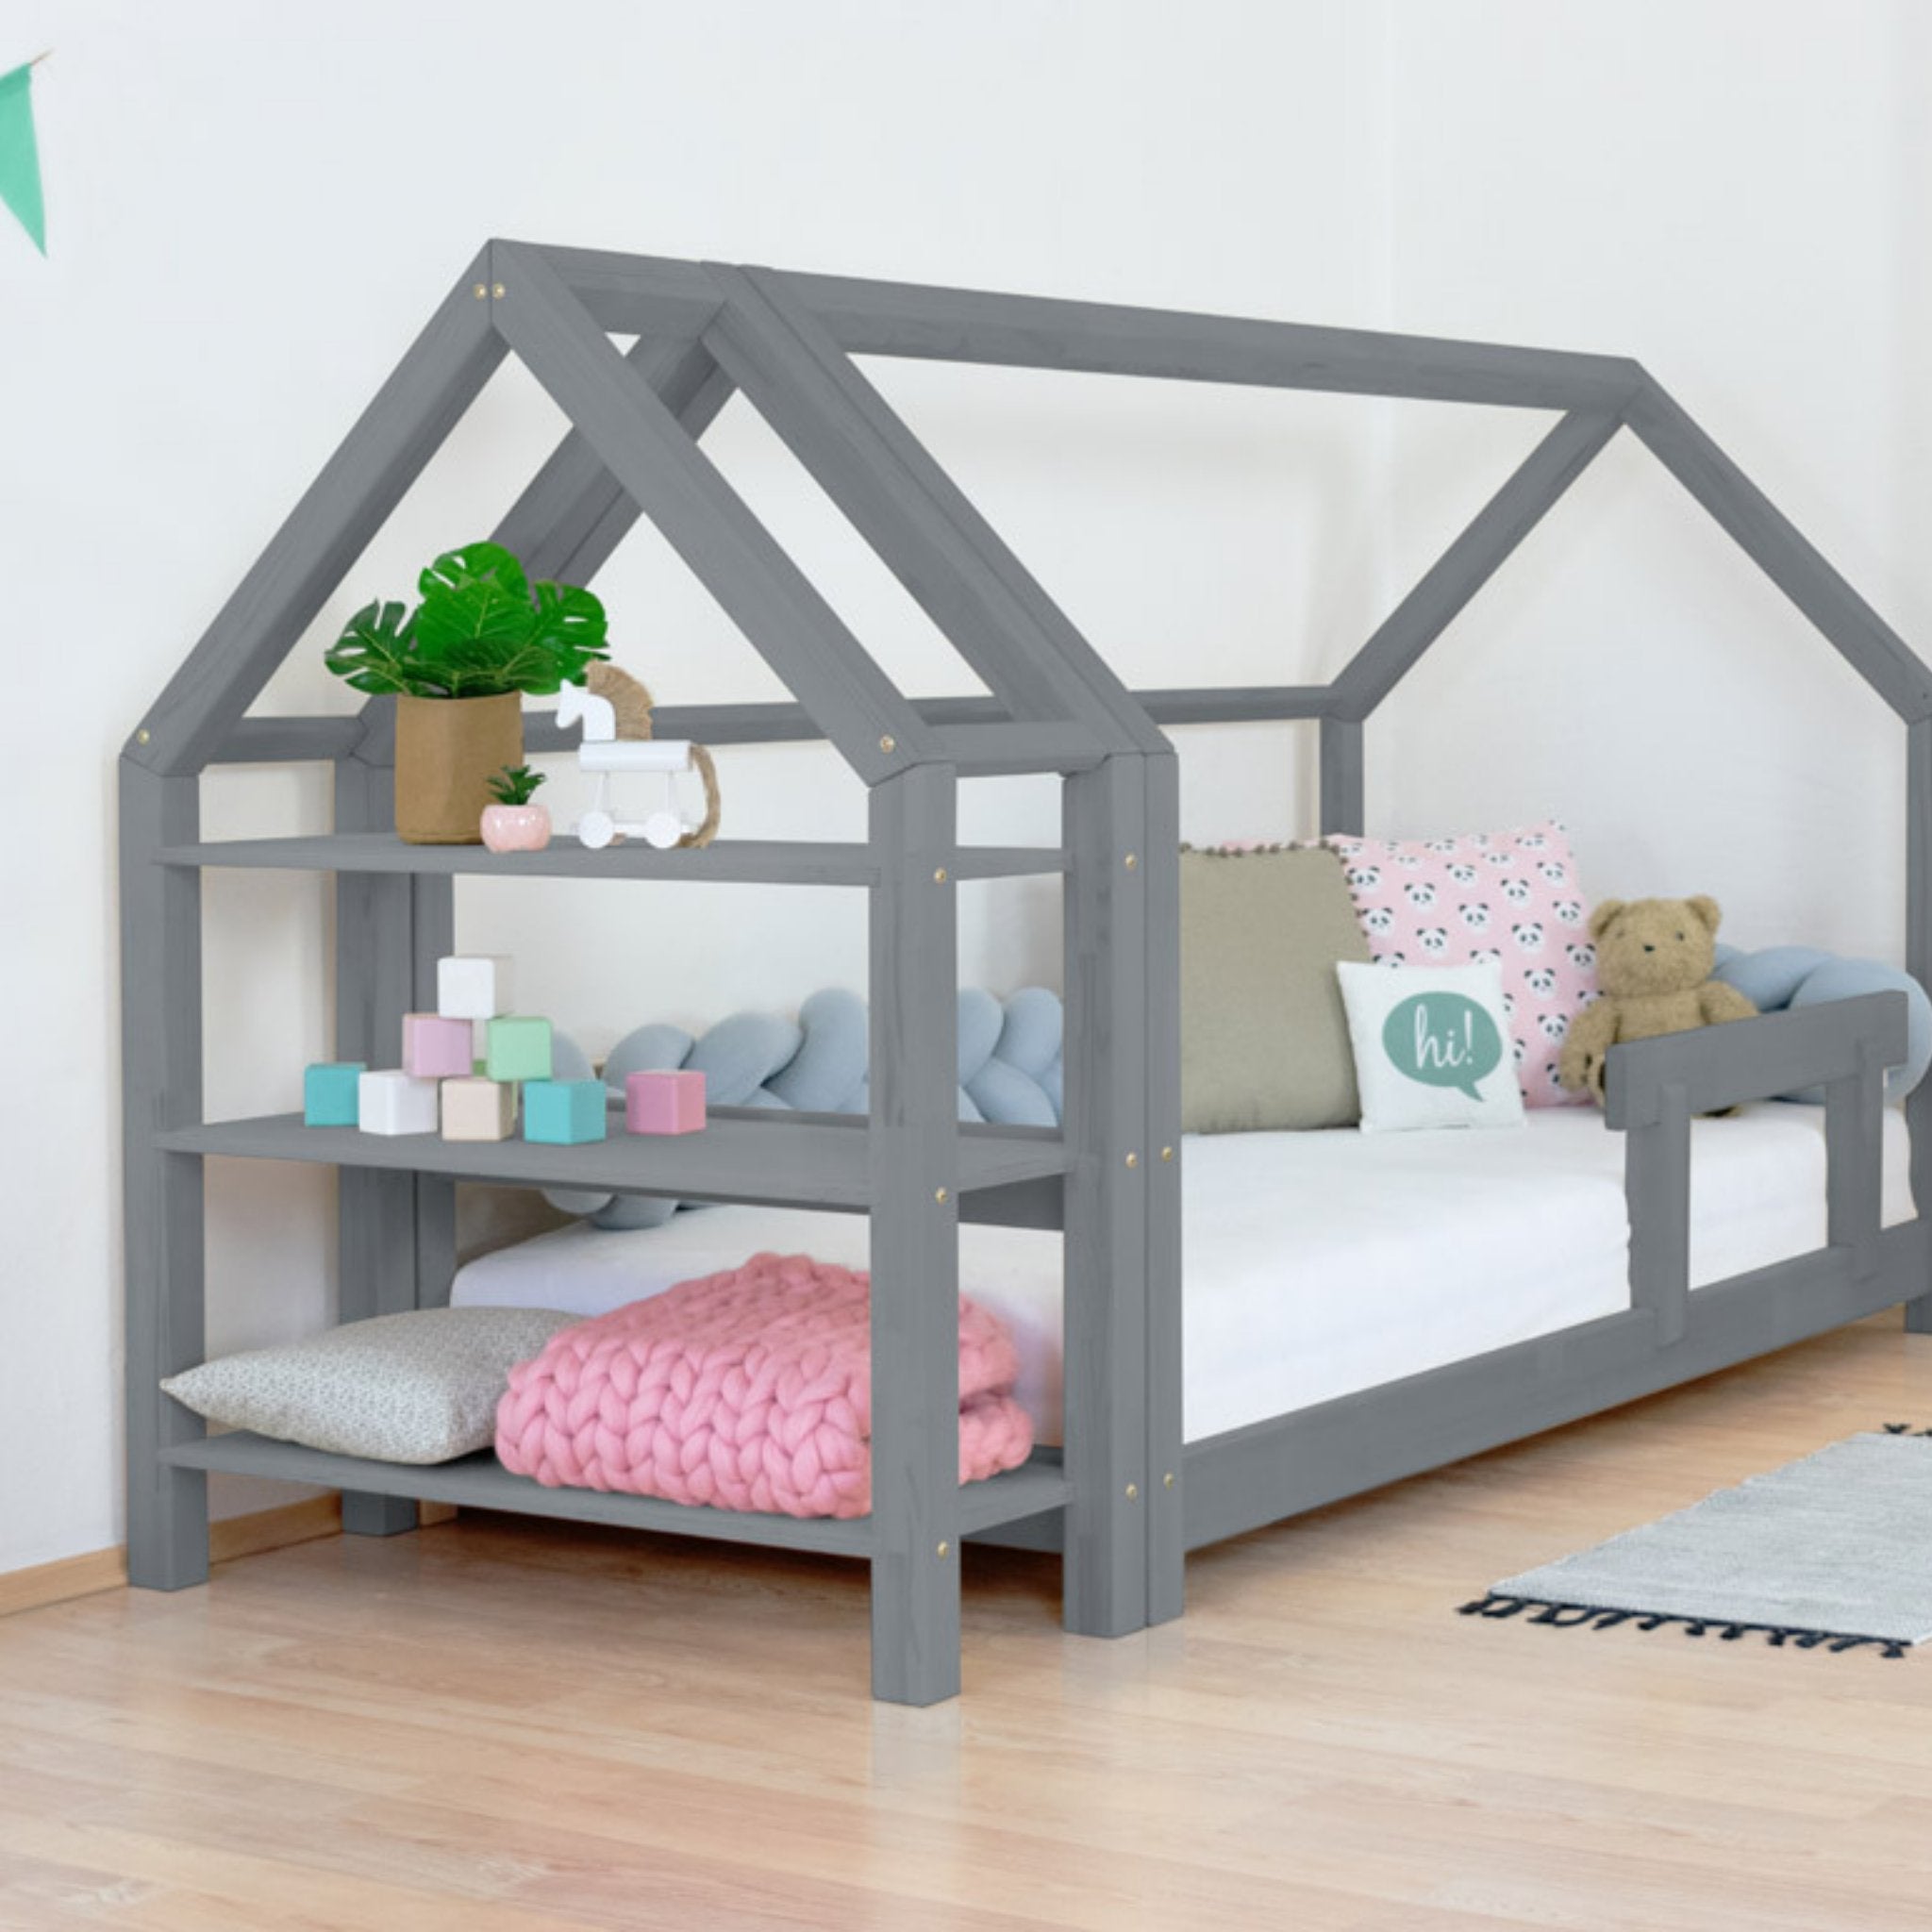 Wooden House Bed and Shelf: TERY + KTERY - Grey